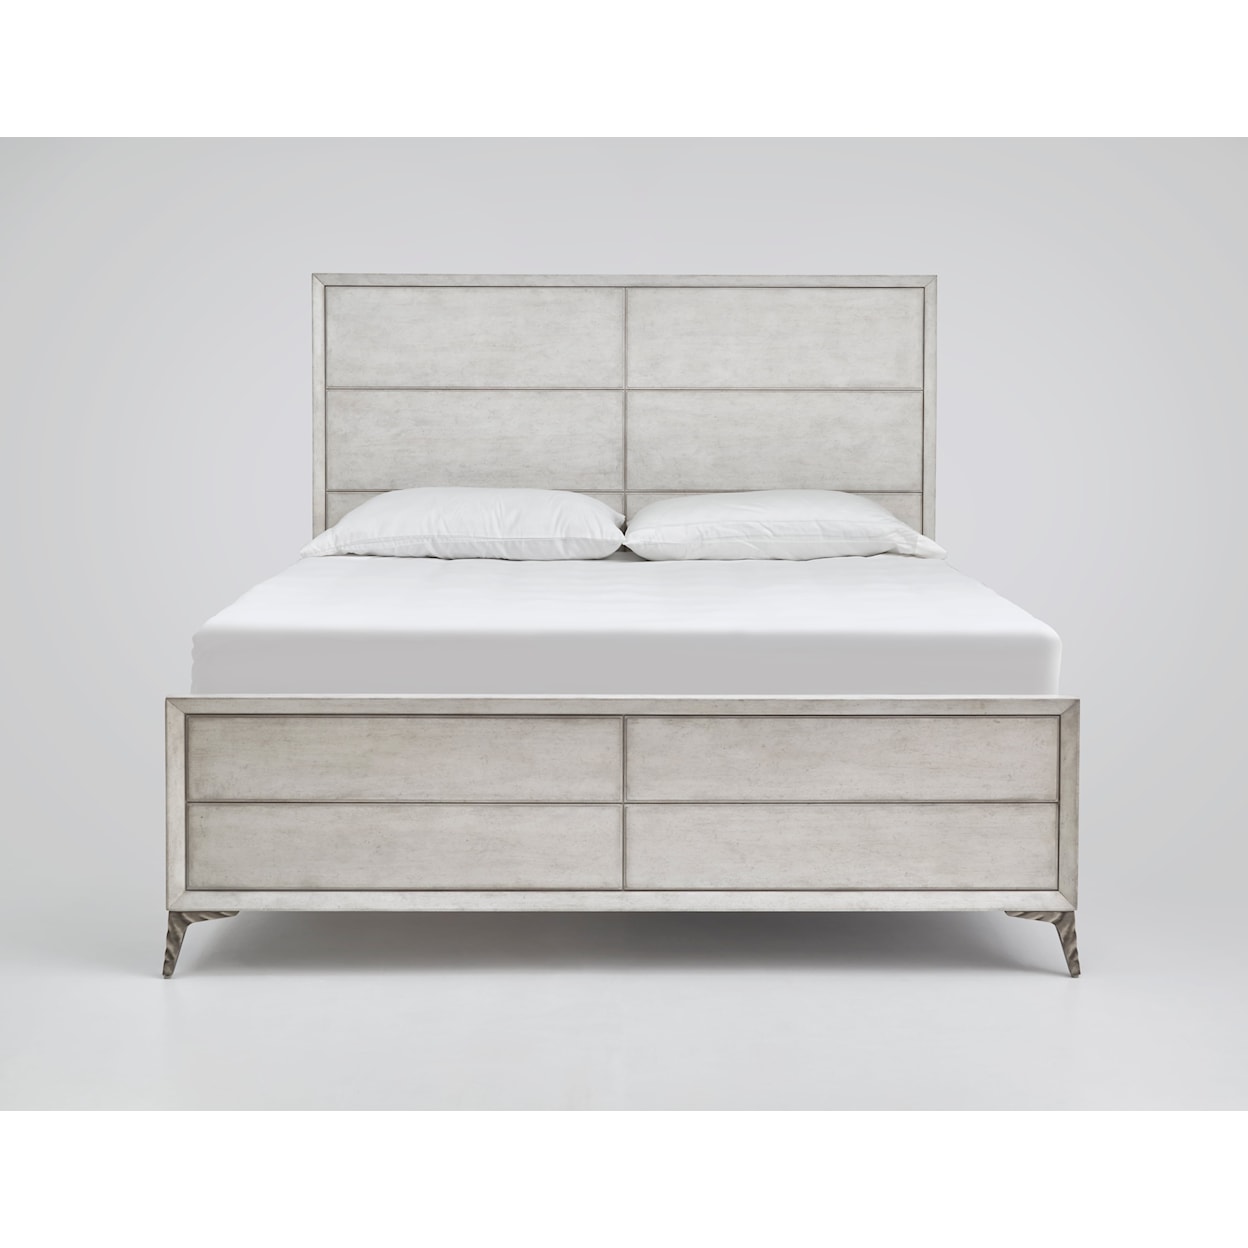 The Preserve Whittier Queen Panel Bed